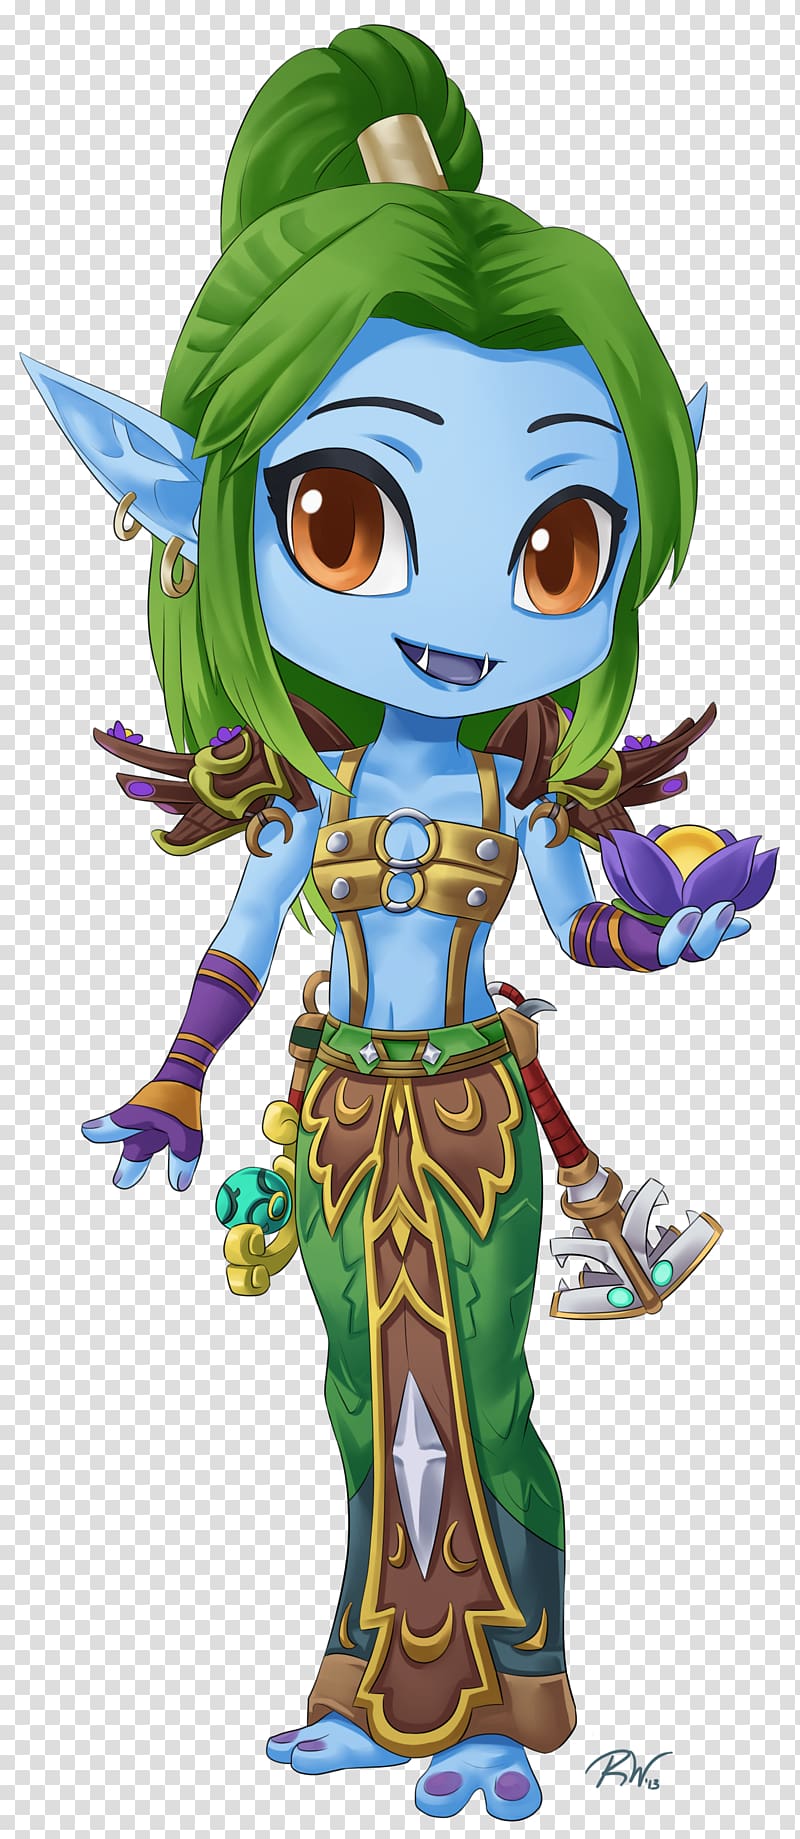 World of Warcraft: Battle for Azeroth Druid Art Goblin, world of warcraft transparent background PNG clipart